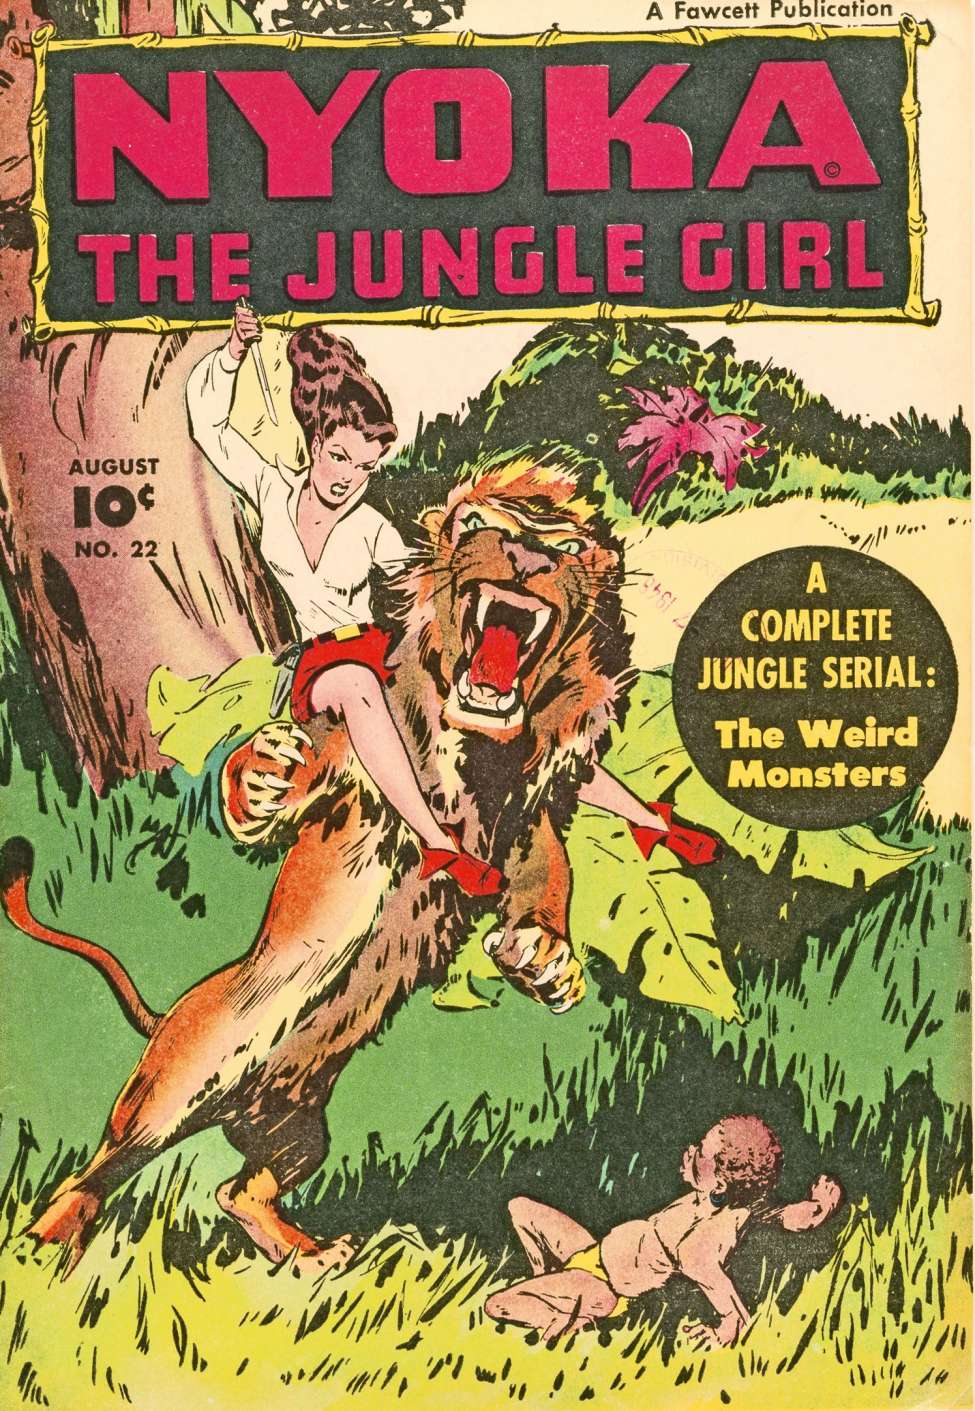 Book Cover For Nyoka the Jungle Girl 22 - Version 2